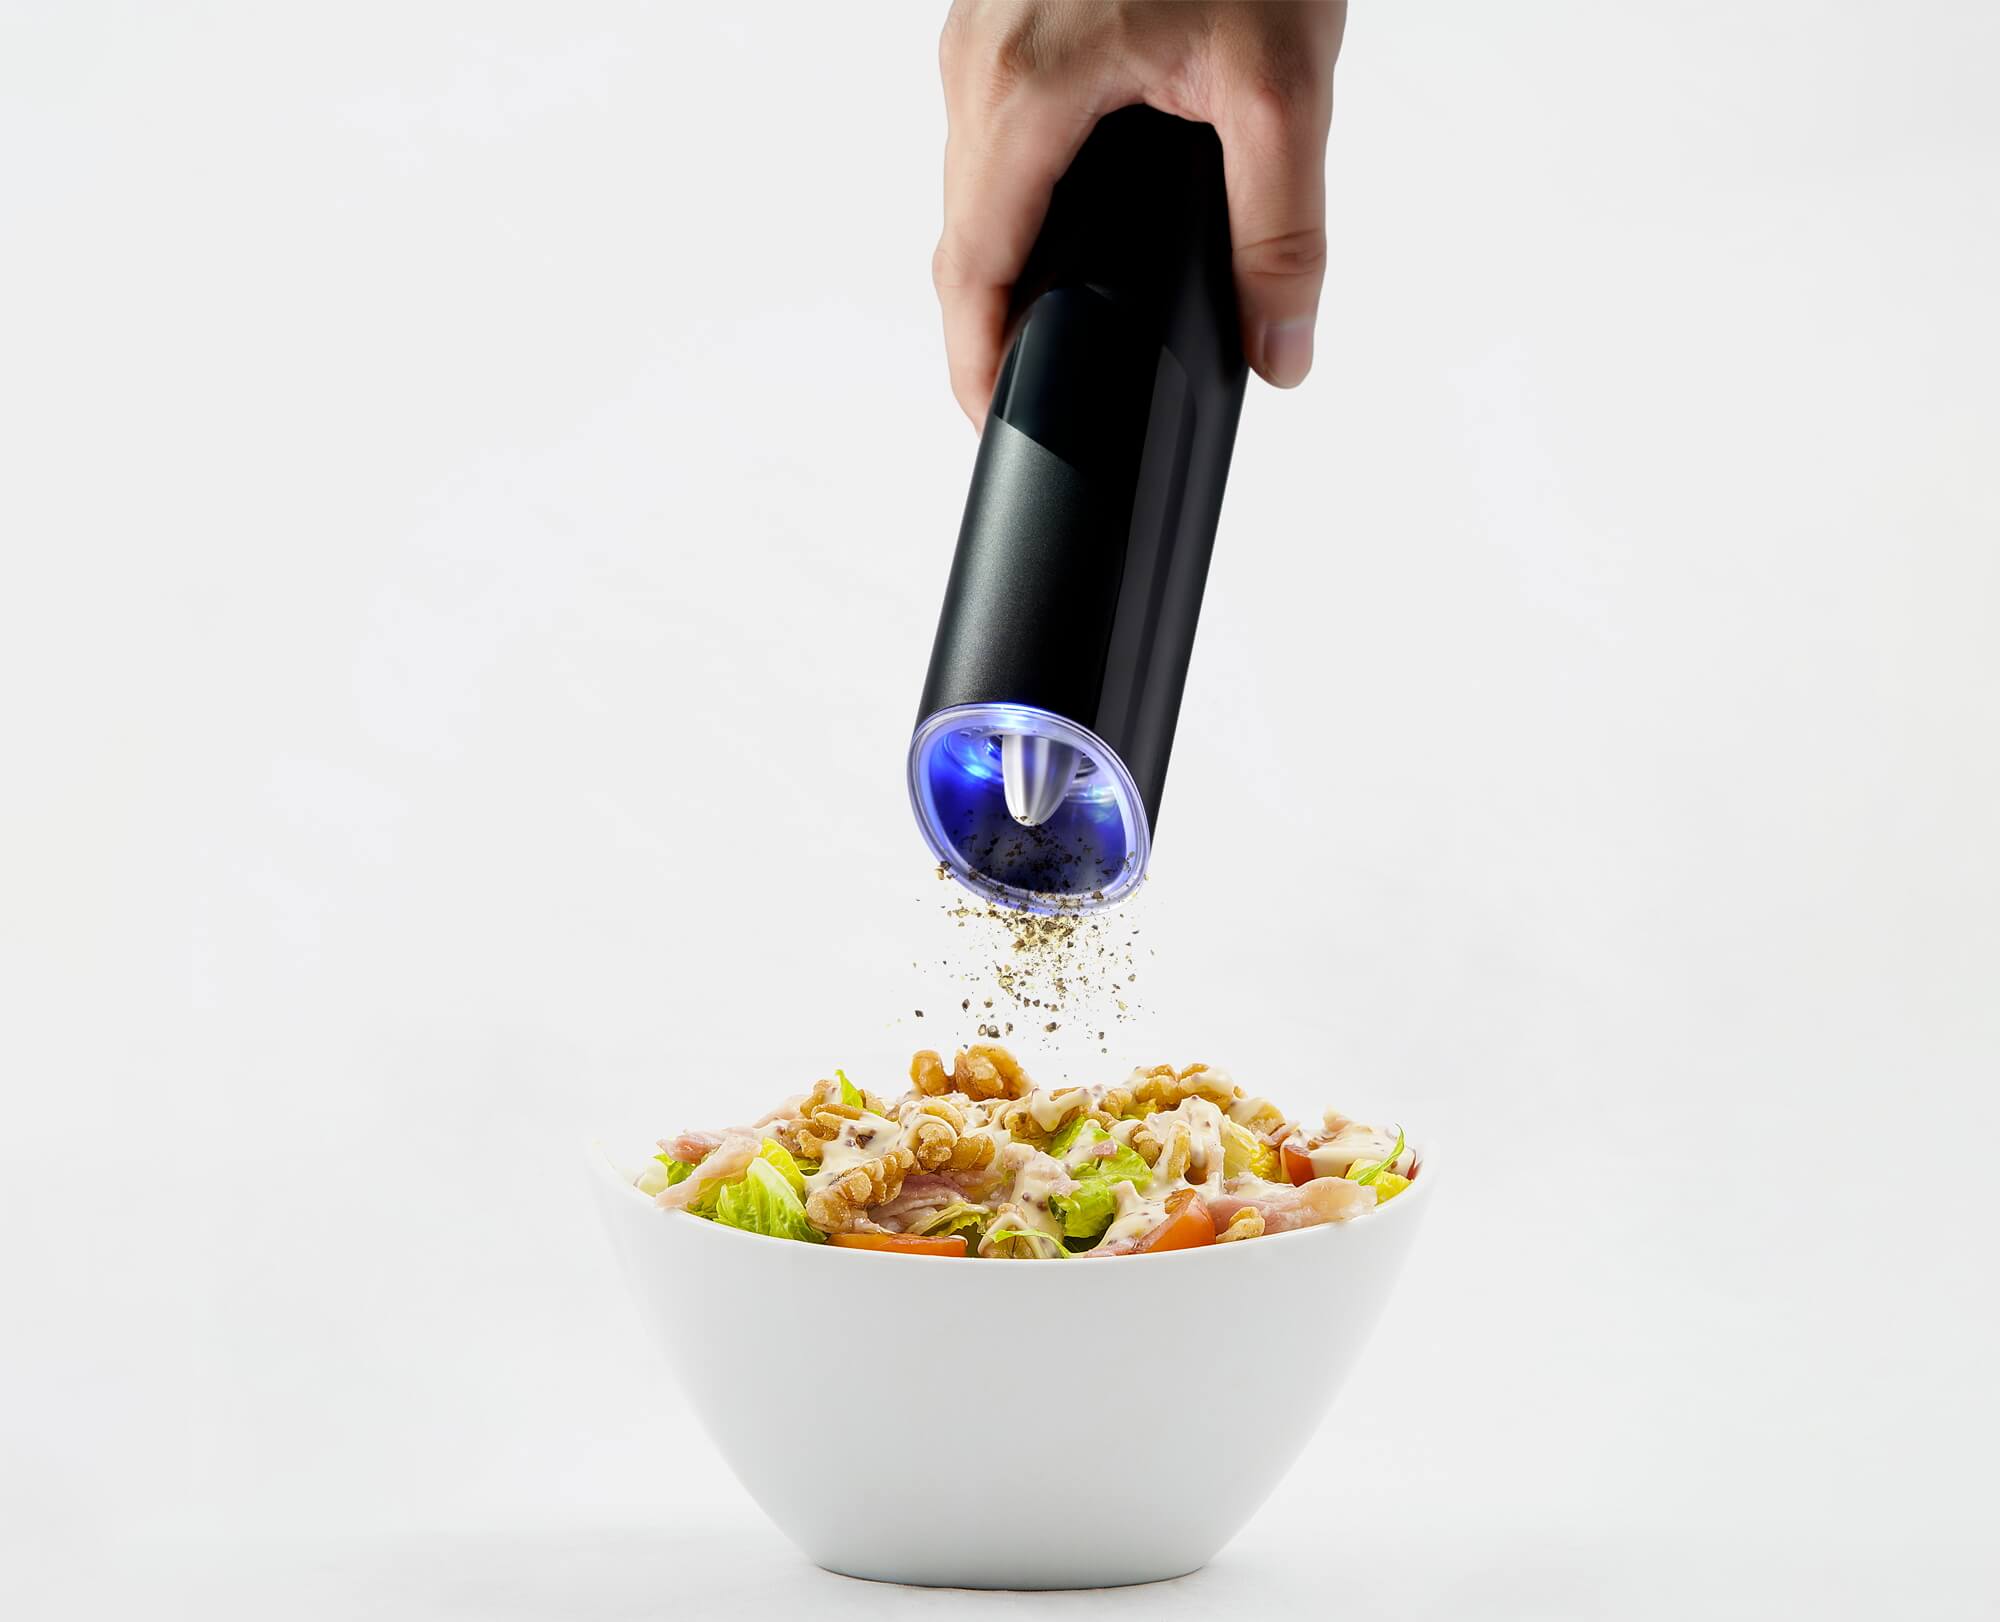 Grinding pepper to the delicious food with Benchusch Modern Electric Gravity Pepper Grinder on the white background